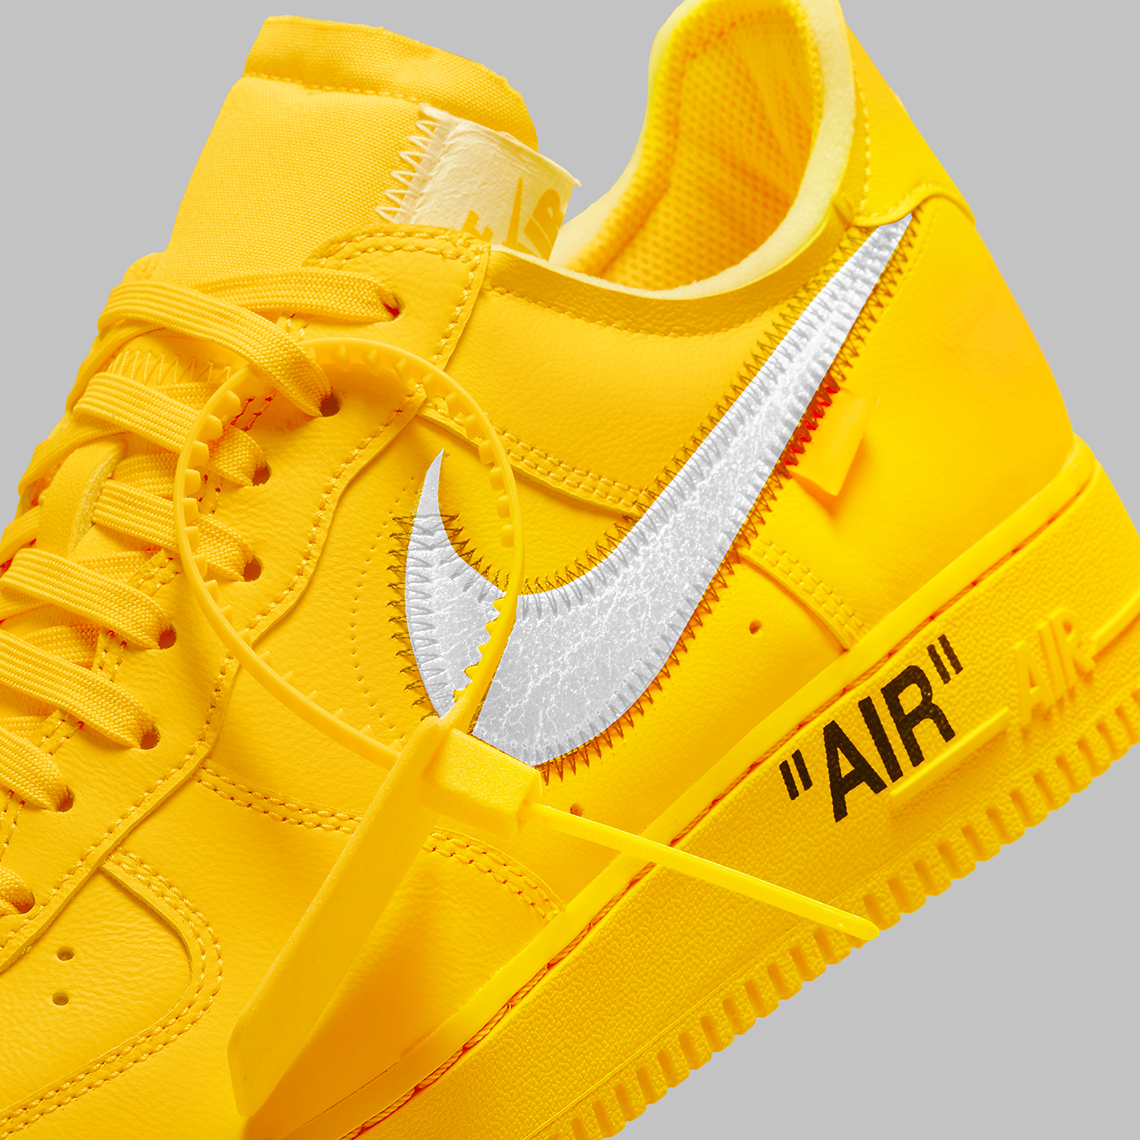 Off-White ™ x Nike Air Force 1 "University Gold"